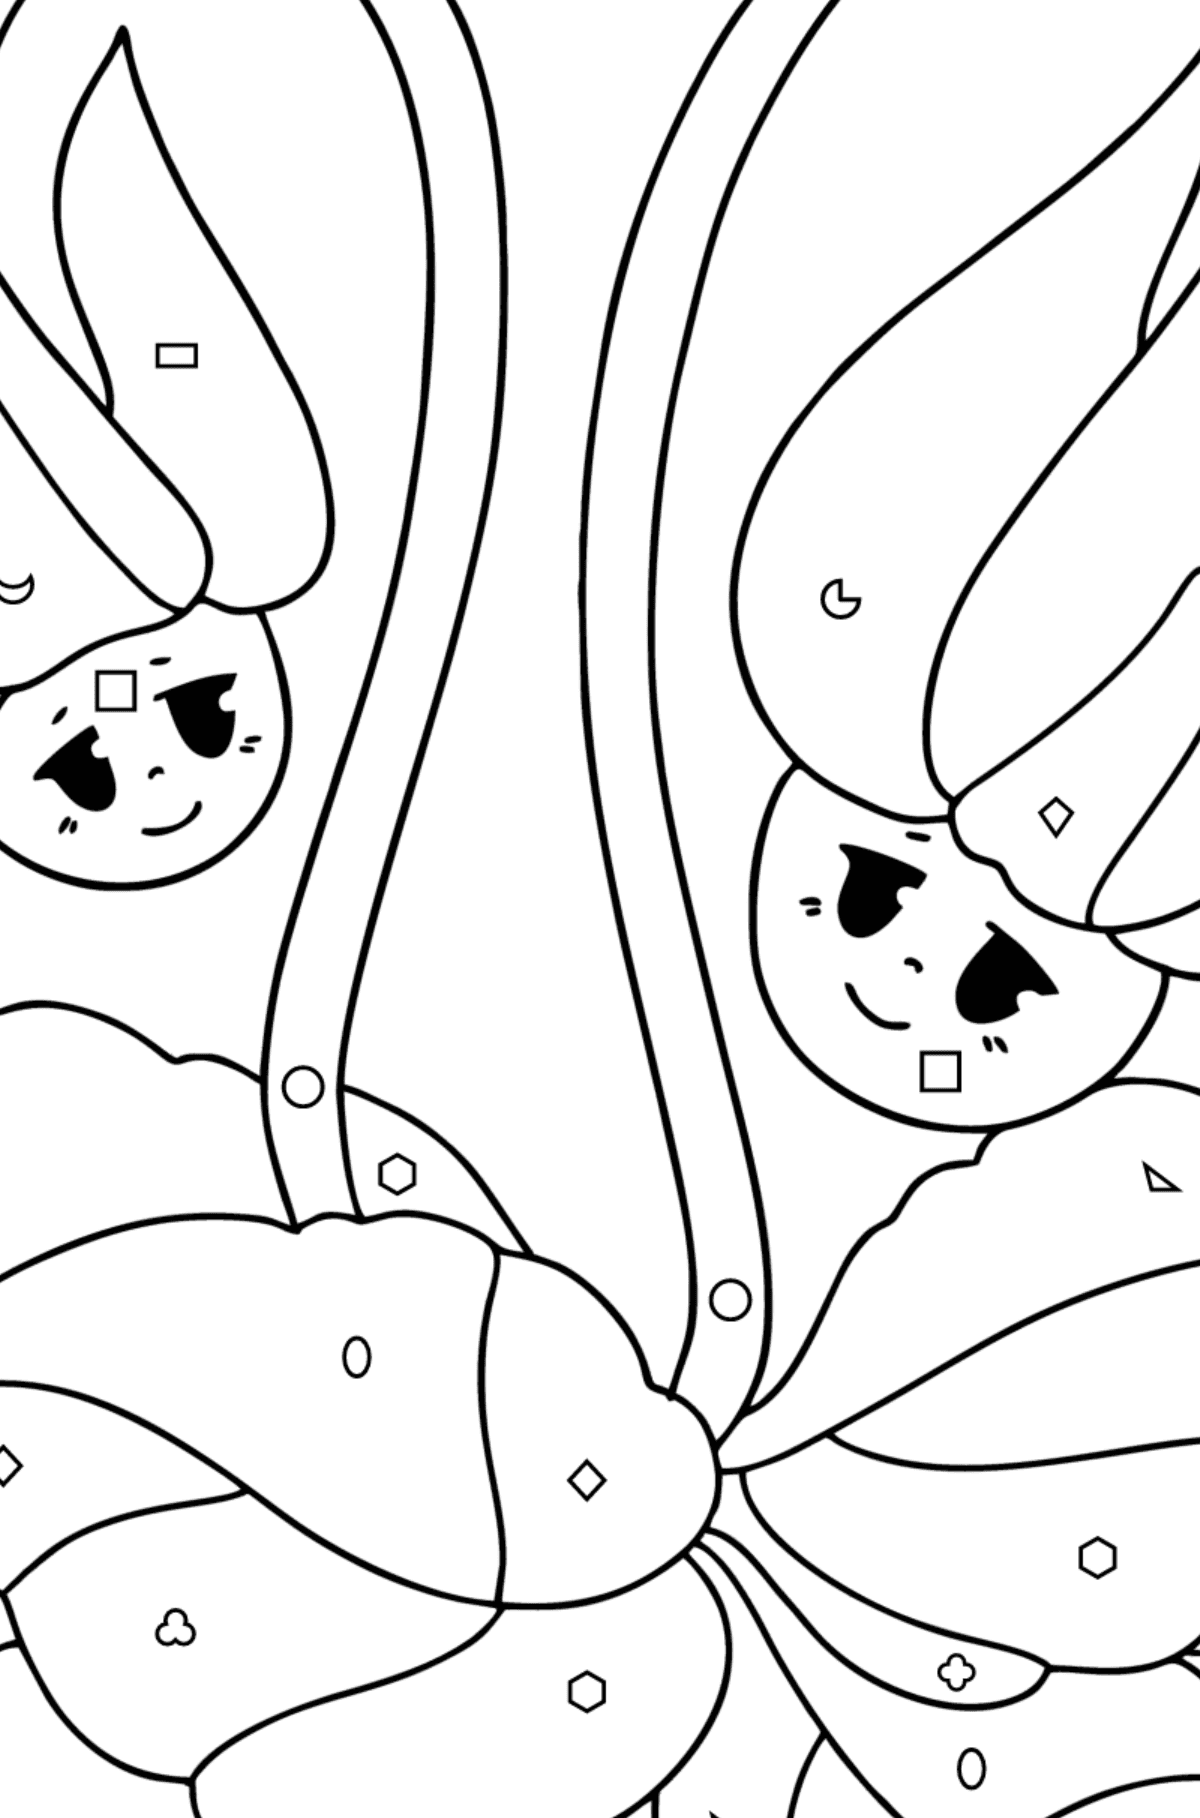 Cyclamen with eyes coloring page - Coloring by Geometric Shapes for Kids